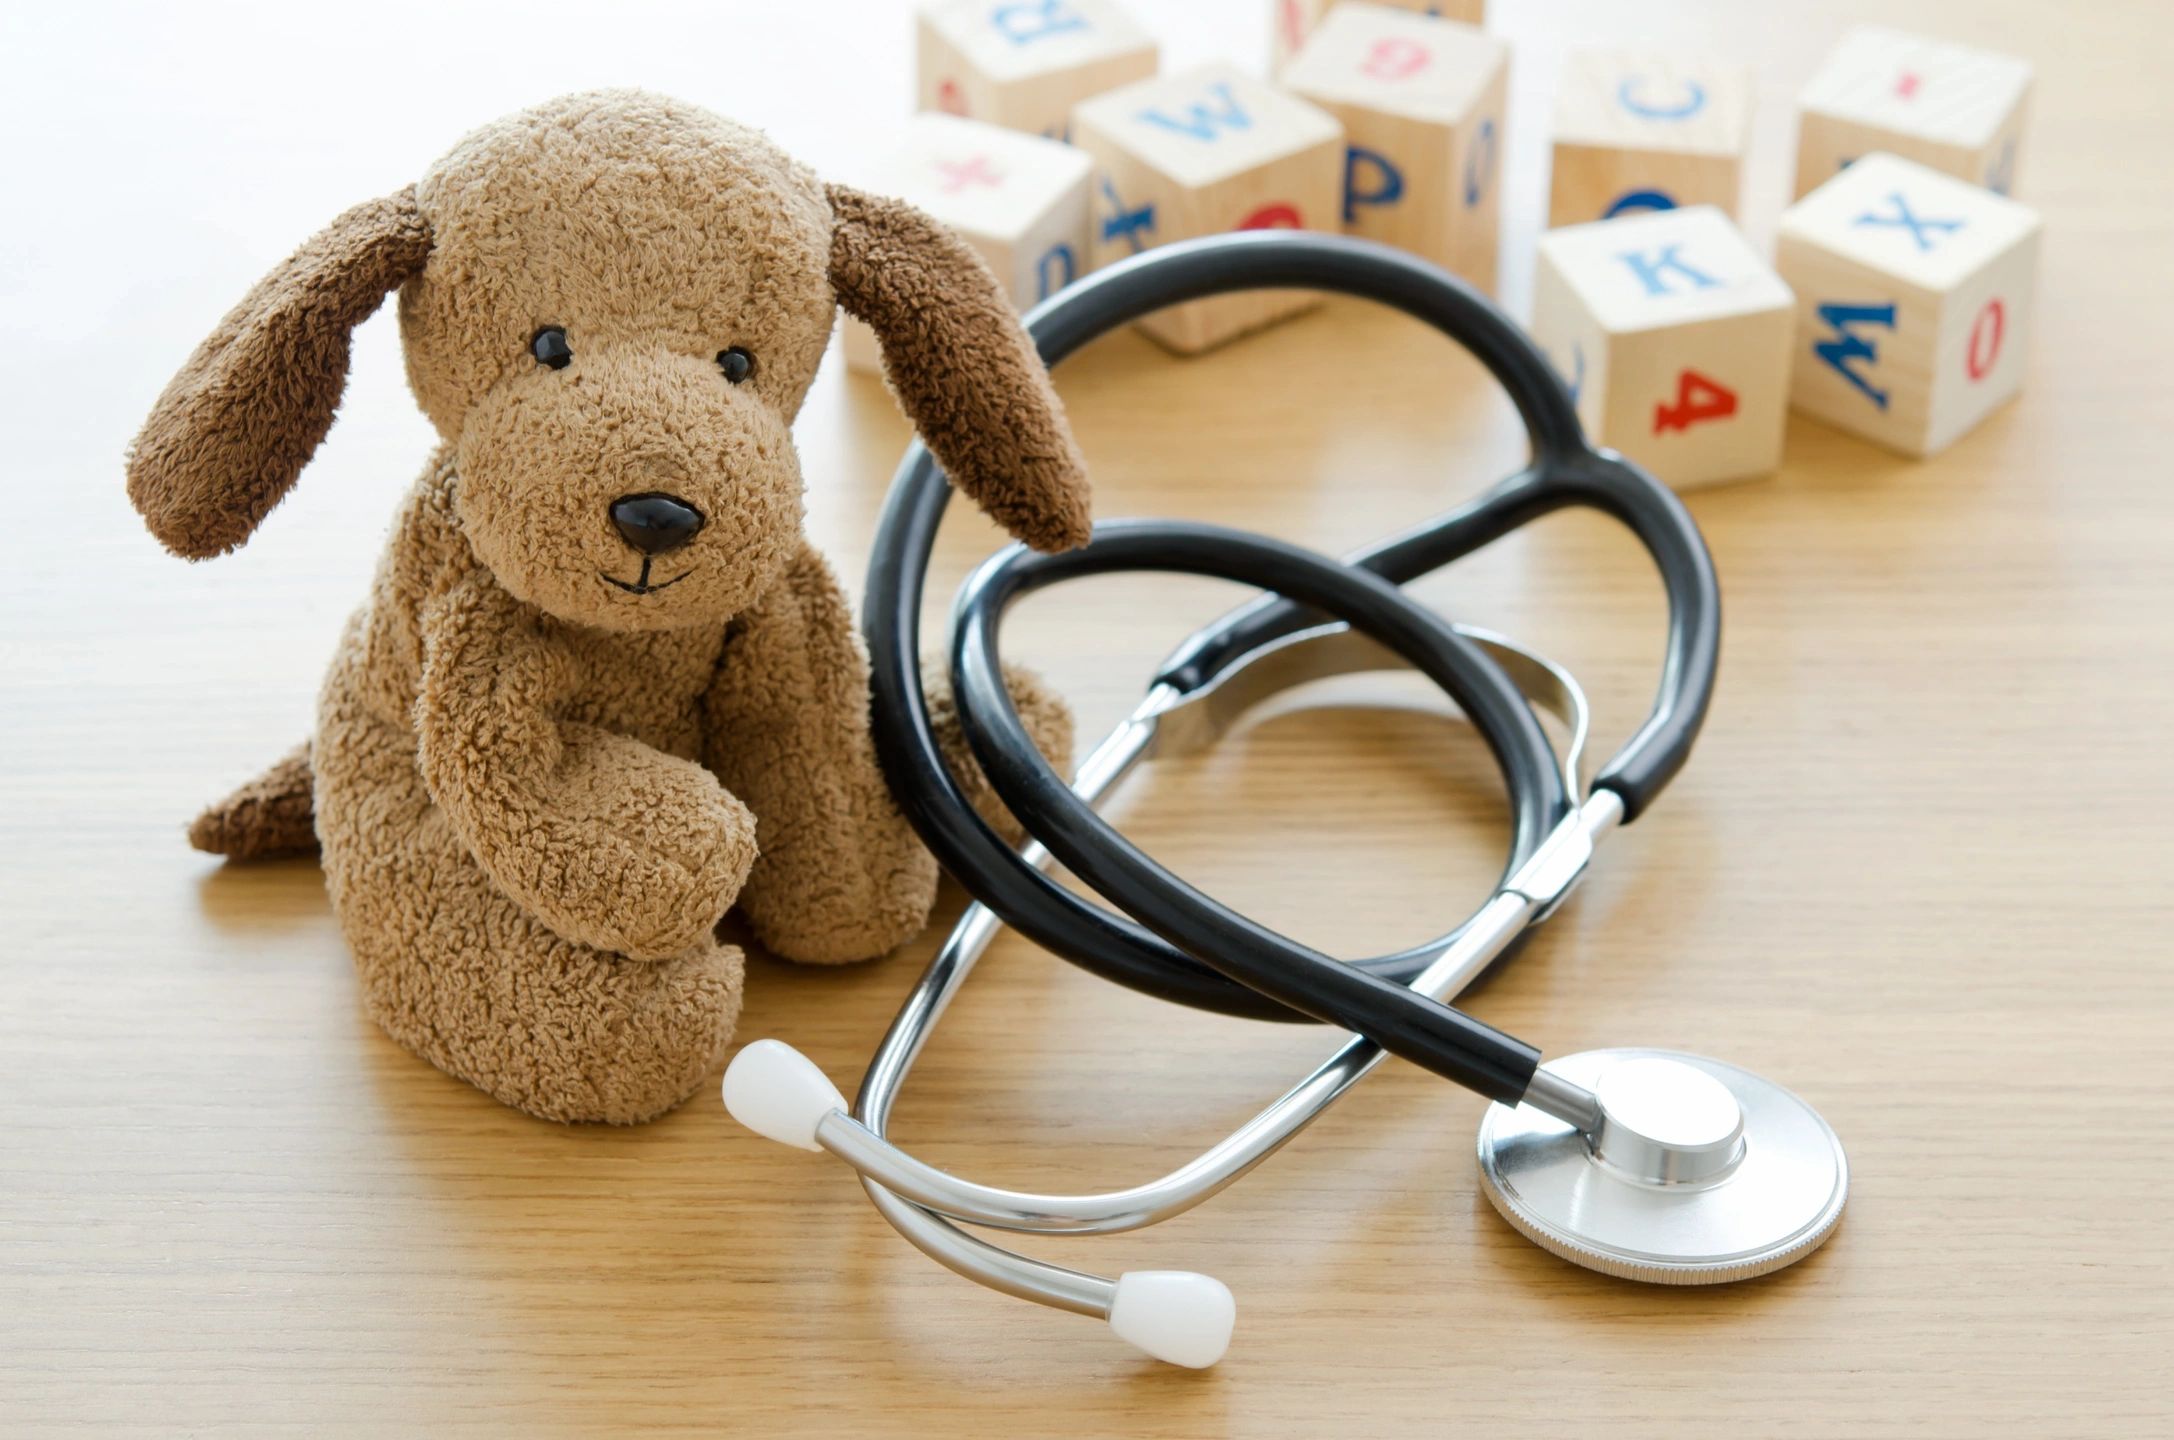 Stuffed brown dog and stethoscope on wooden table with children's building blocks behind.